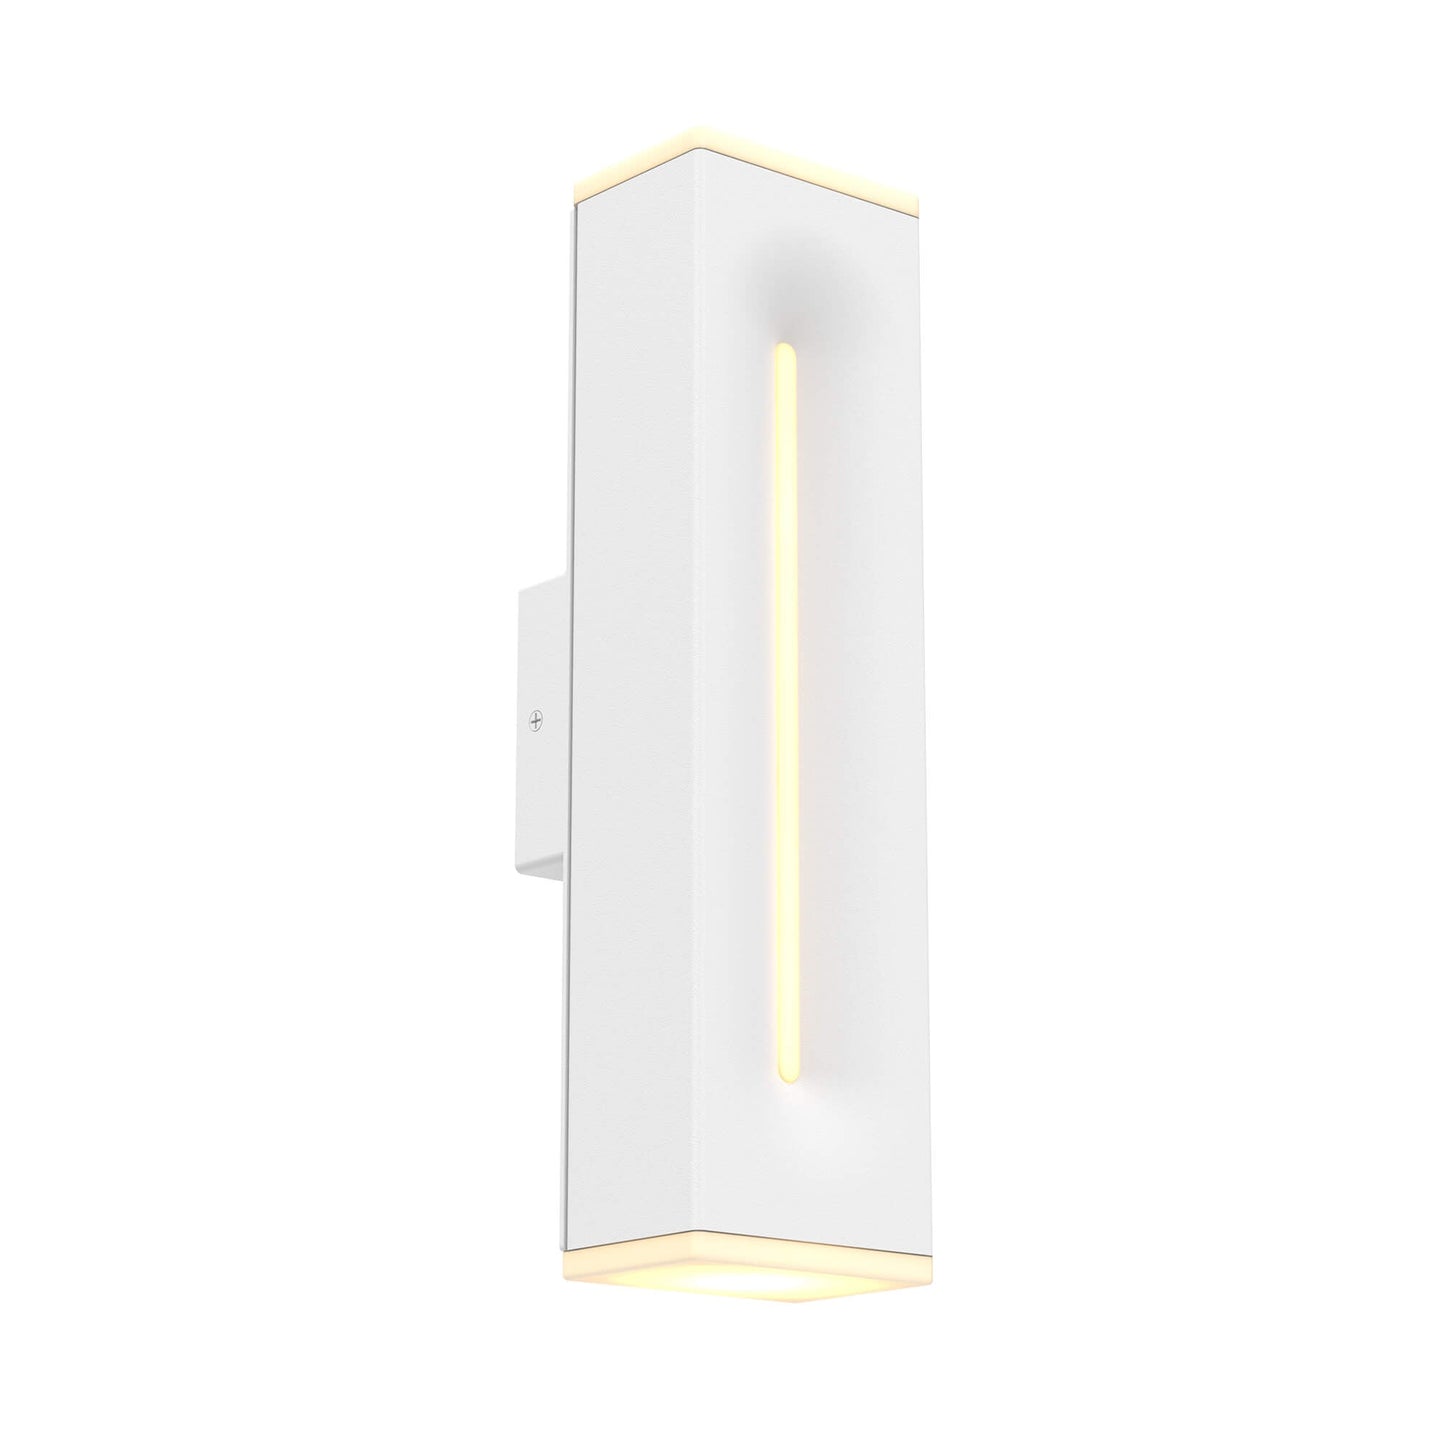 DALS-LWJ16-CC-WHDals Lighting LWJ16-CC 16" 20W LED Wall Sconce Selectable CCT